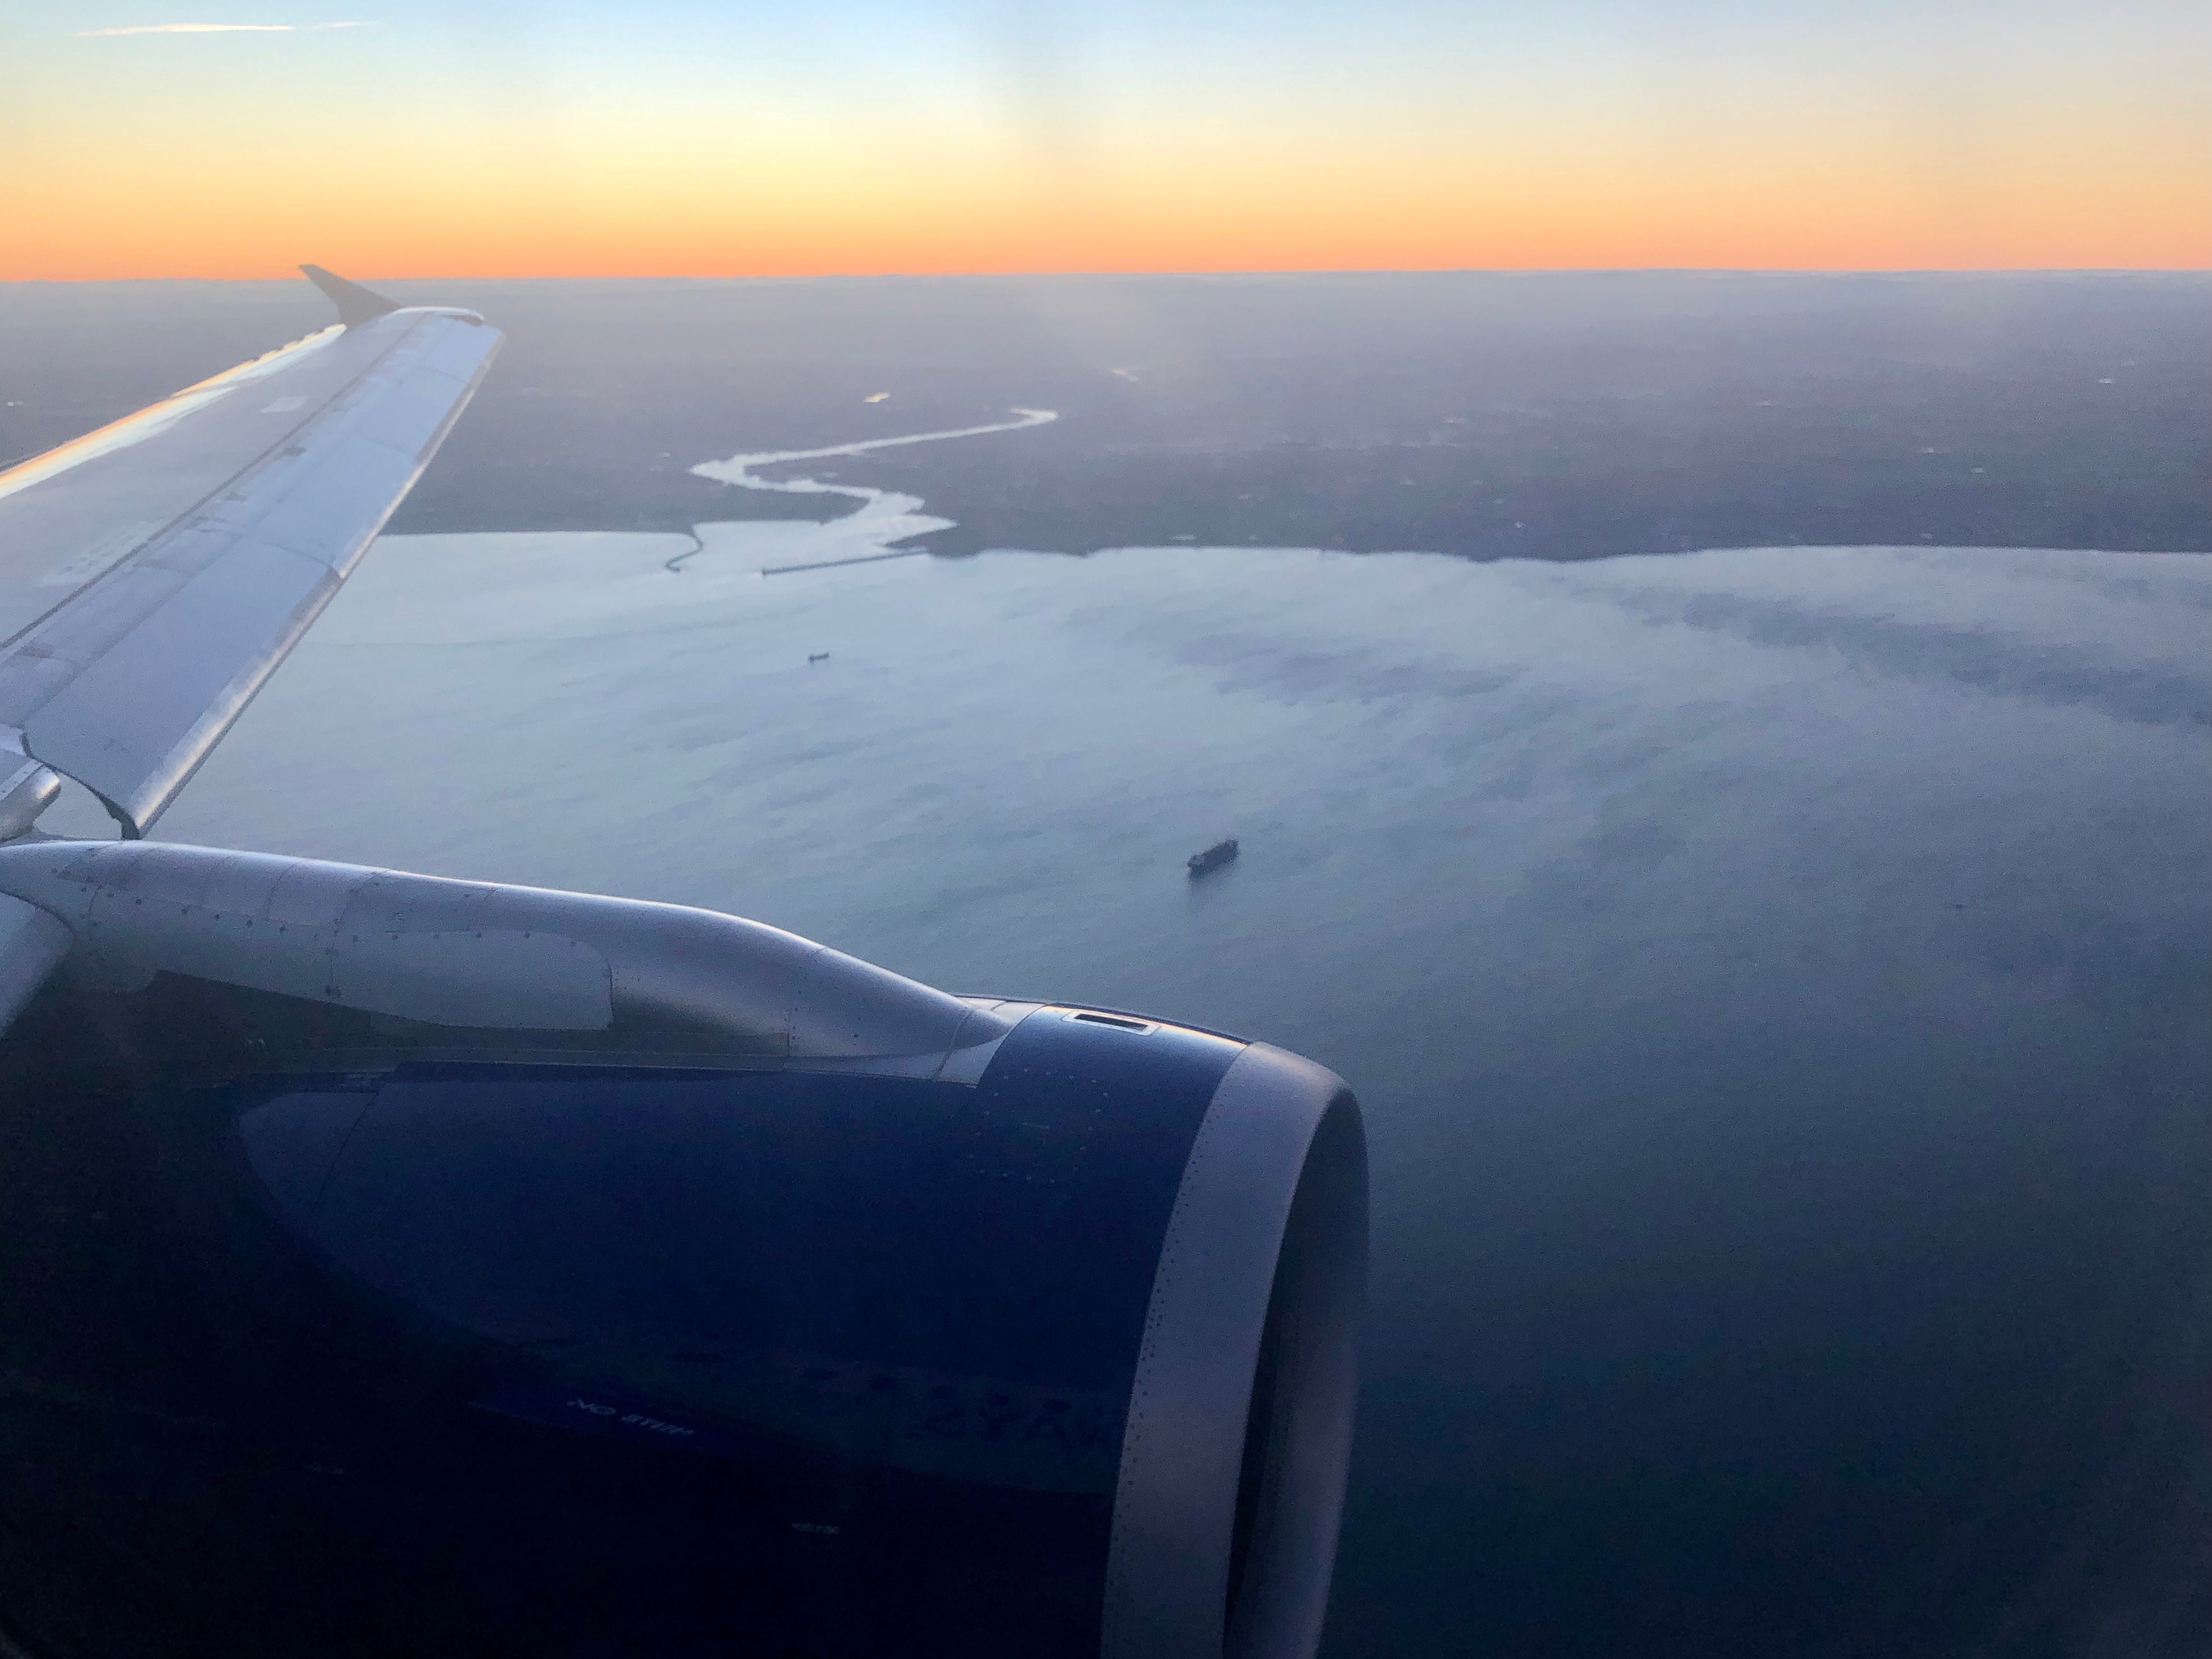 Sun on the Tyne: View from a British Airways flight from Heathrow to Newcastle